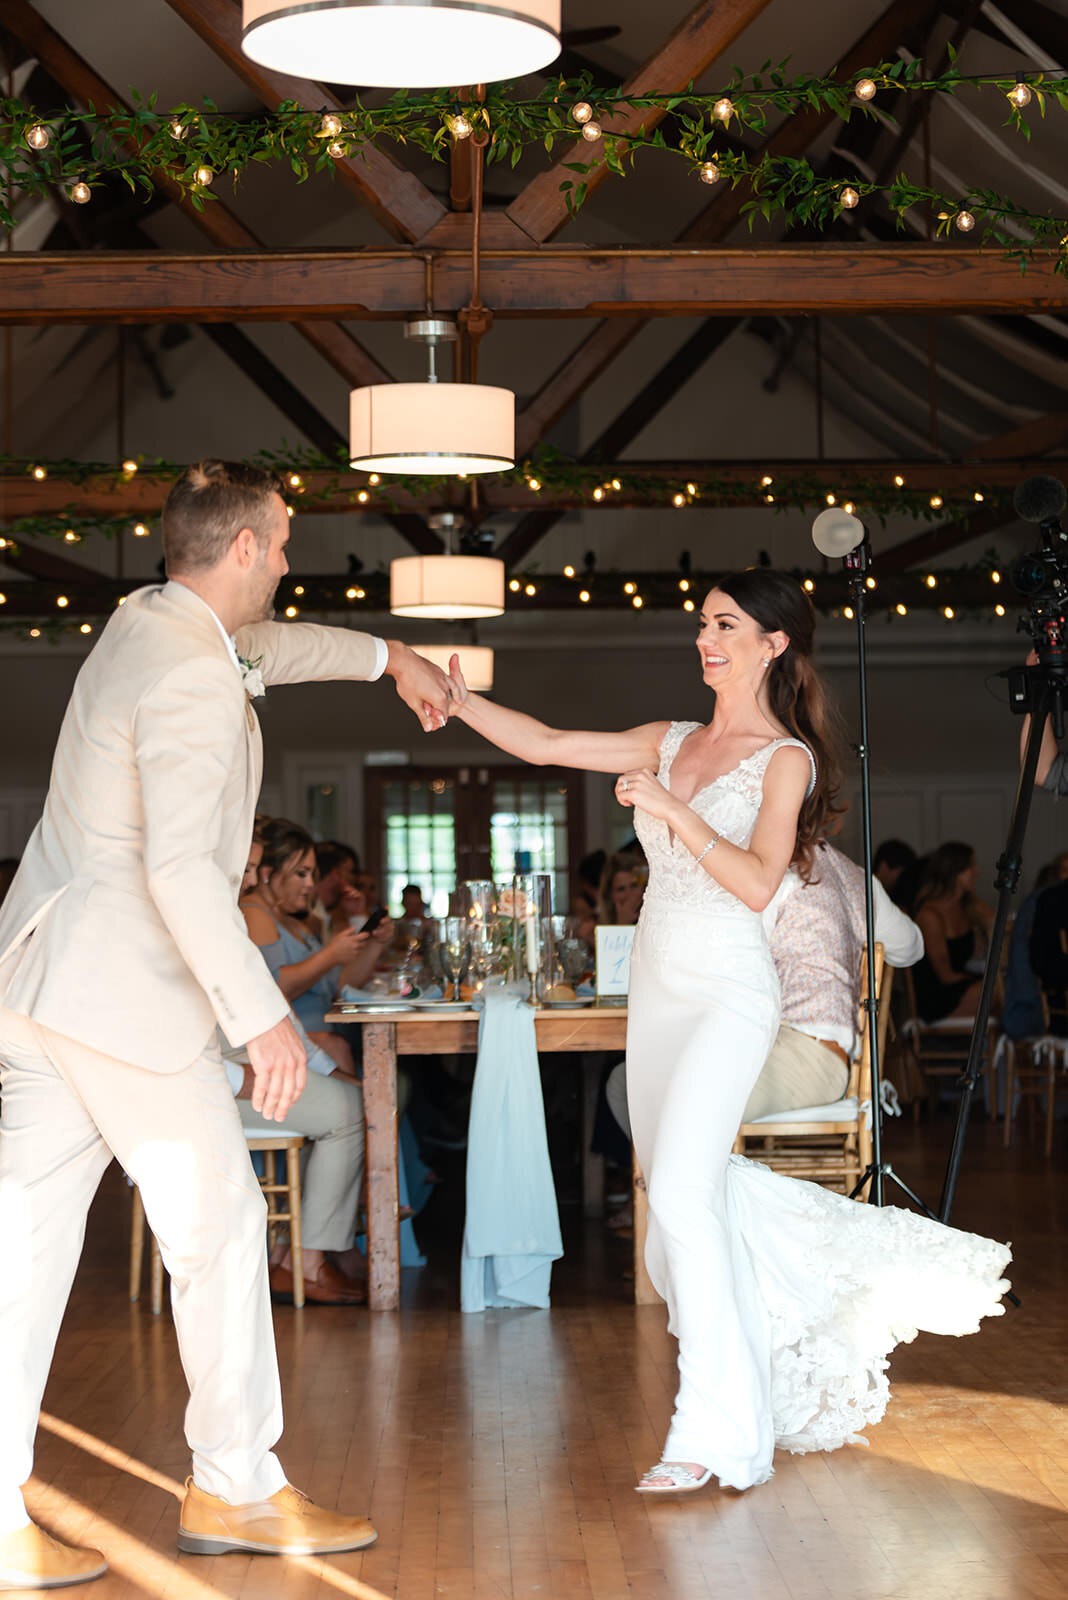 The bride playfully leads the groom onto the dance floor, with the wedding party watching and smiling.